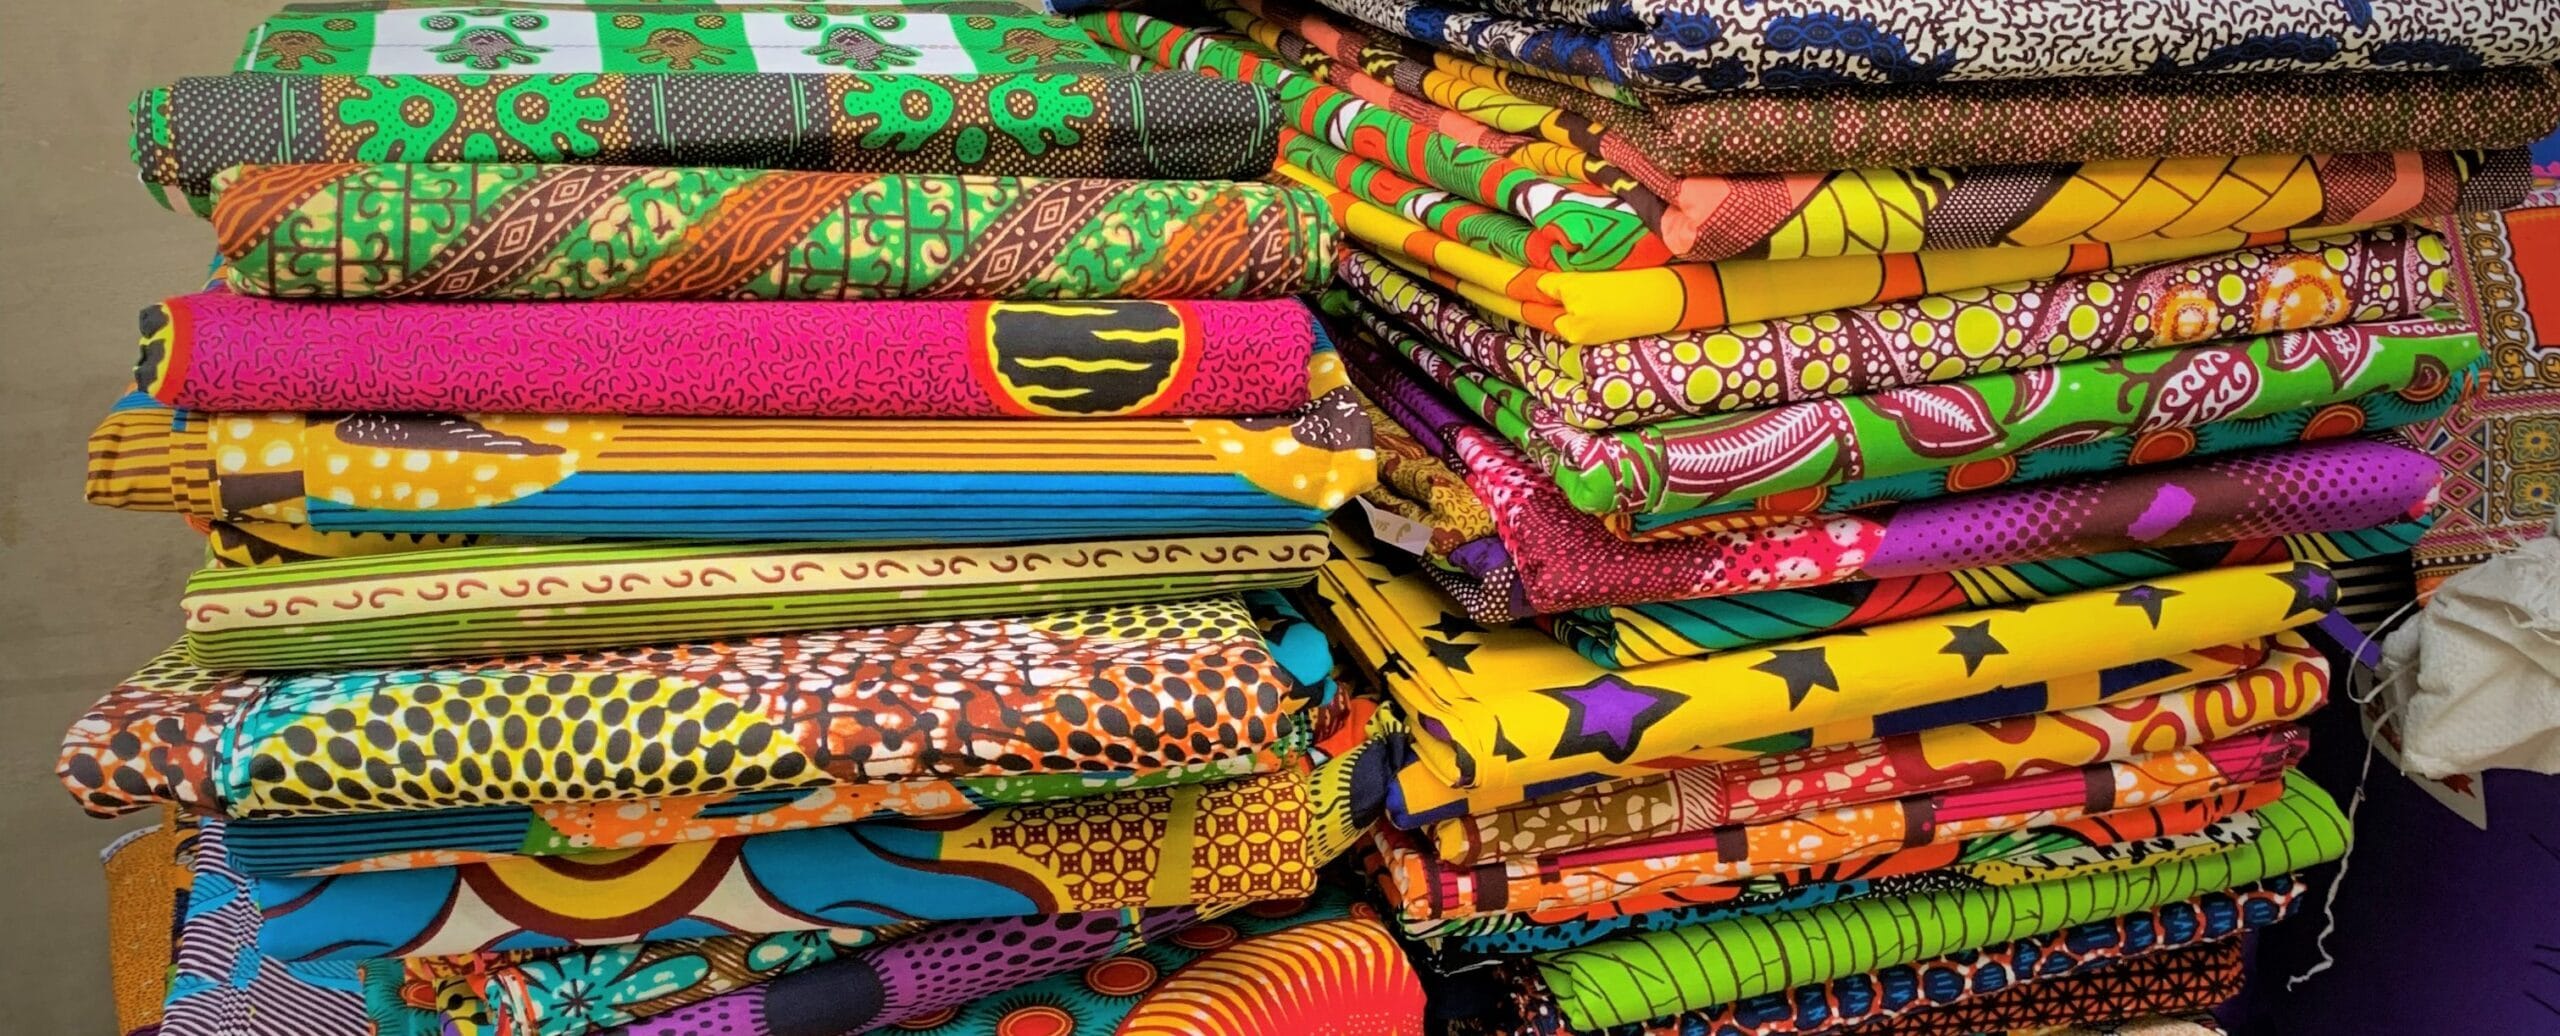 Were fully stocked in our West African textile range, from indigo cotton to mudcloth.